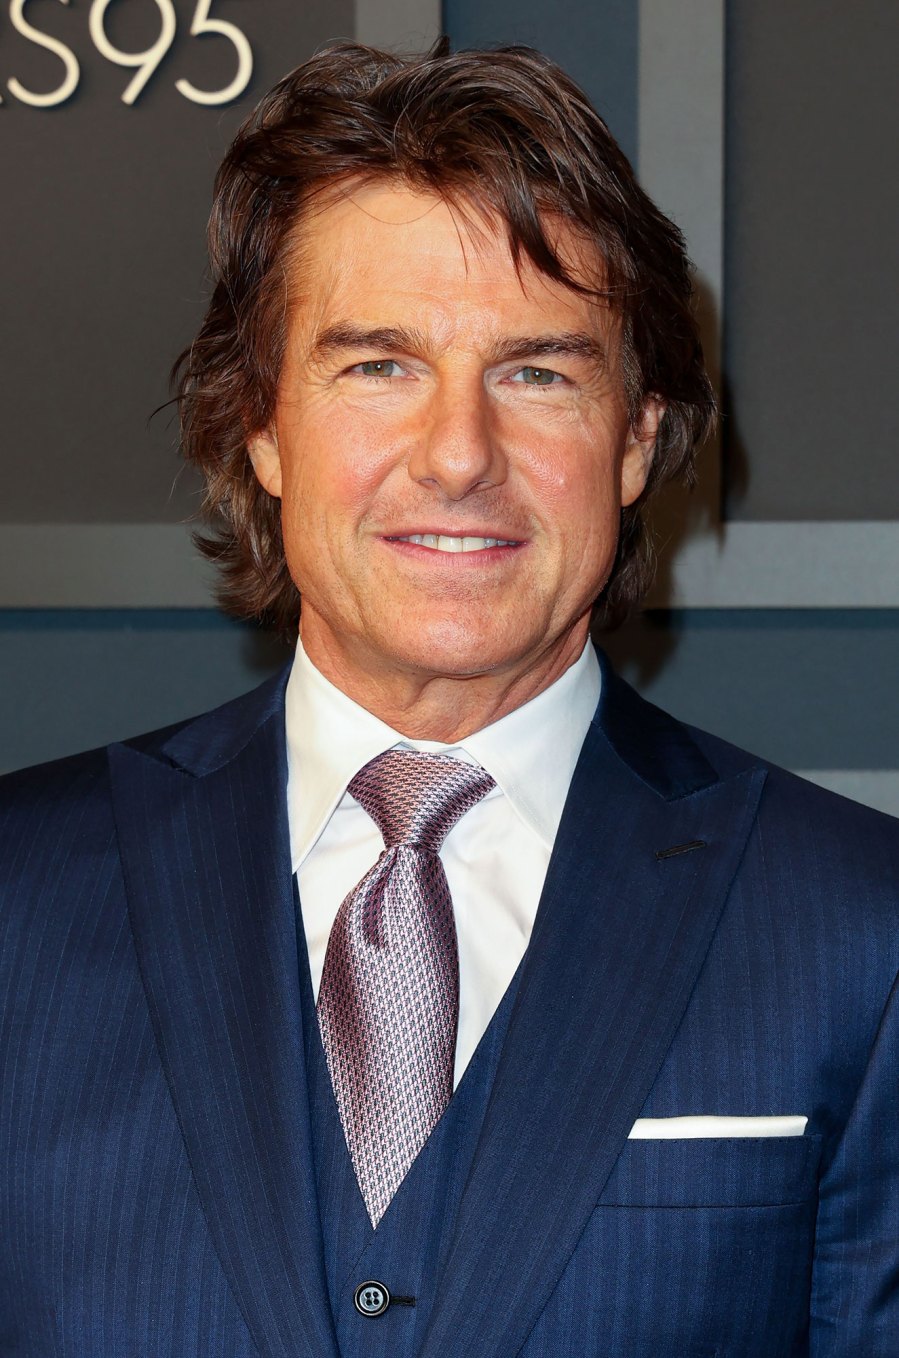 Tom Cruise Shows Off Long Hair lavender tie